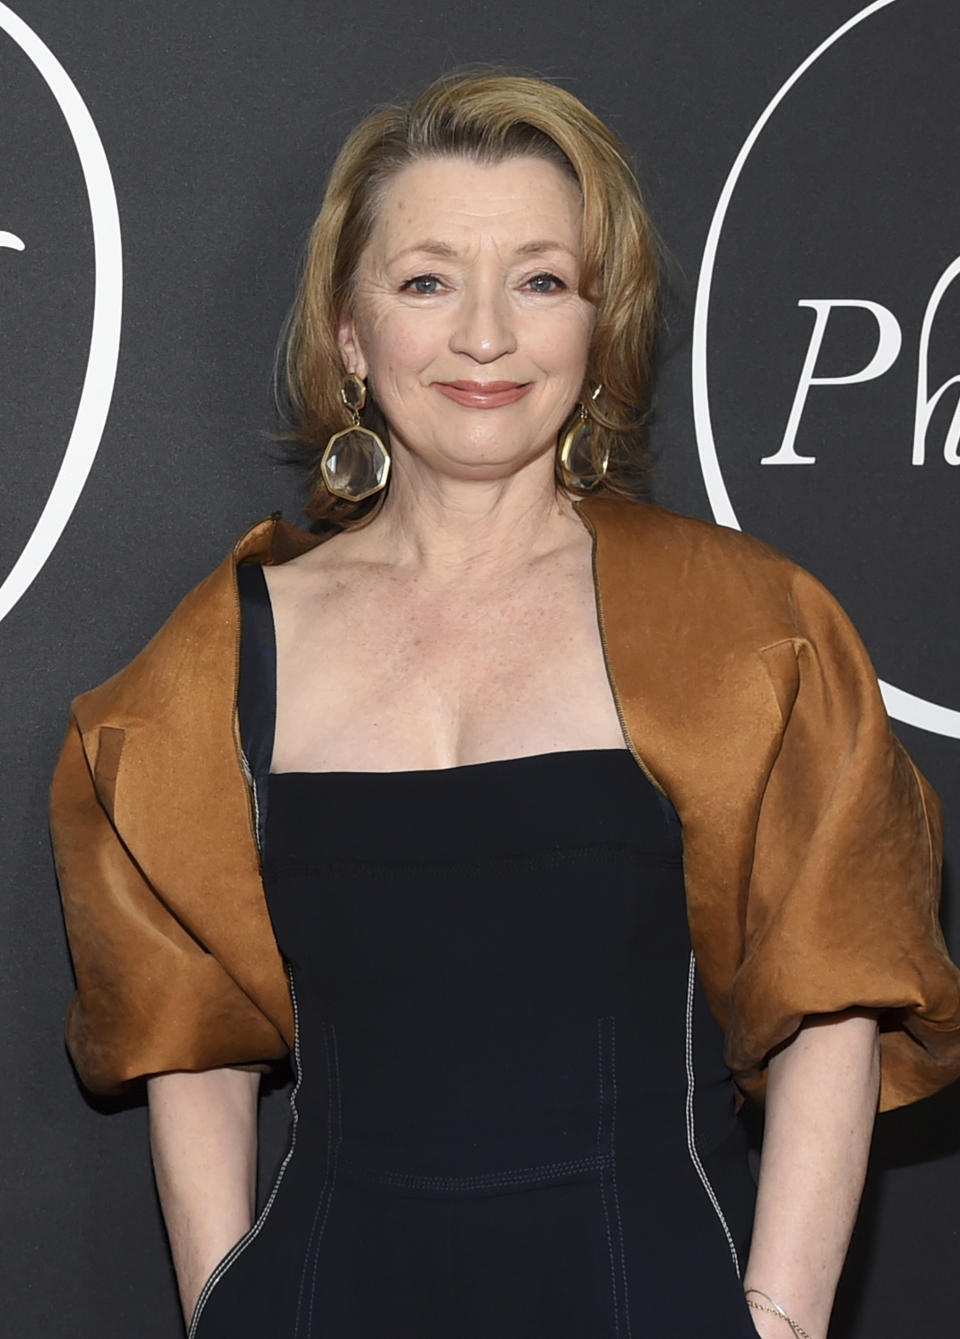 FILE - Actress Lesley Manville appears at the premiere party for "Phantom Thread" in New York on Dec. 11, 2017. Manville currently stars in the film "Let Him Go" with Kevin Costner and Diane Lane. (Photo by Evan Agostini/Invision/AP, File)